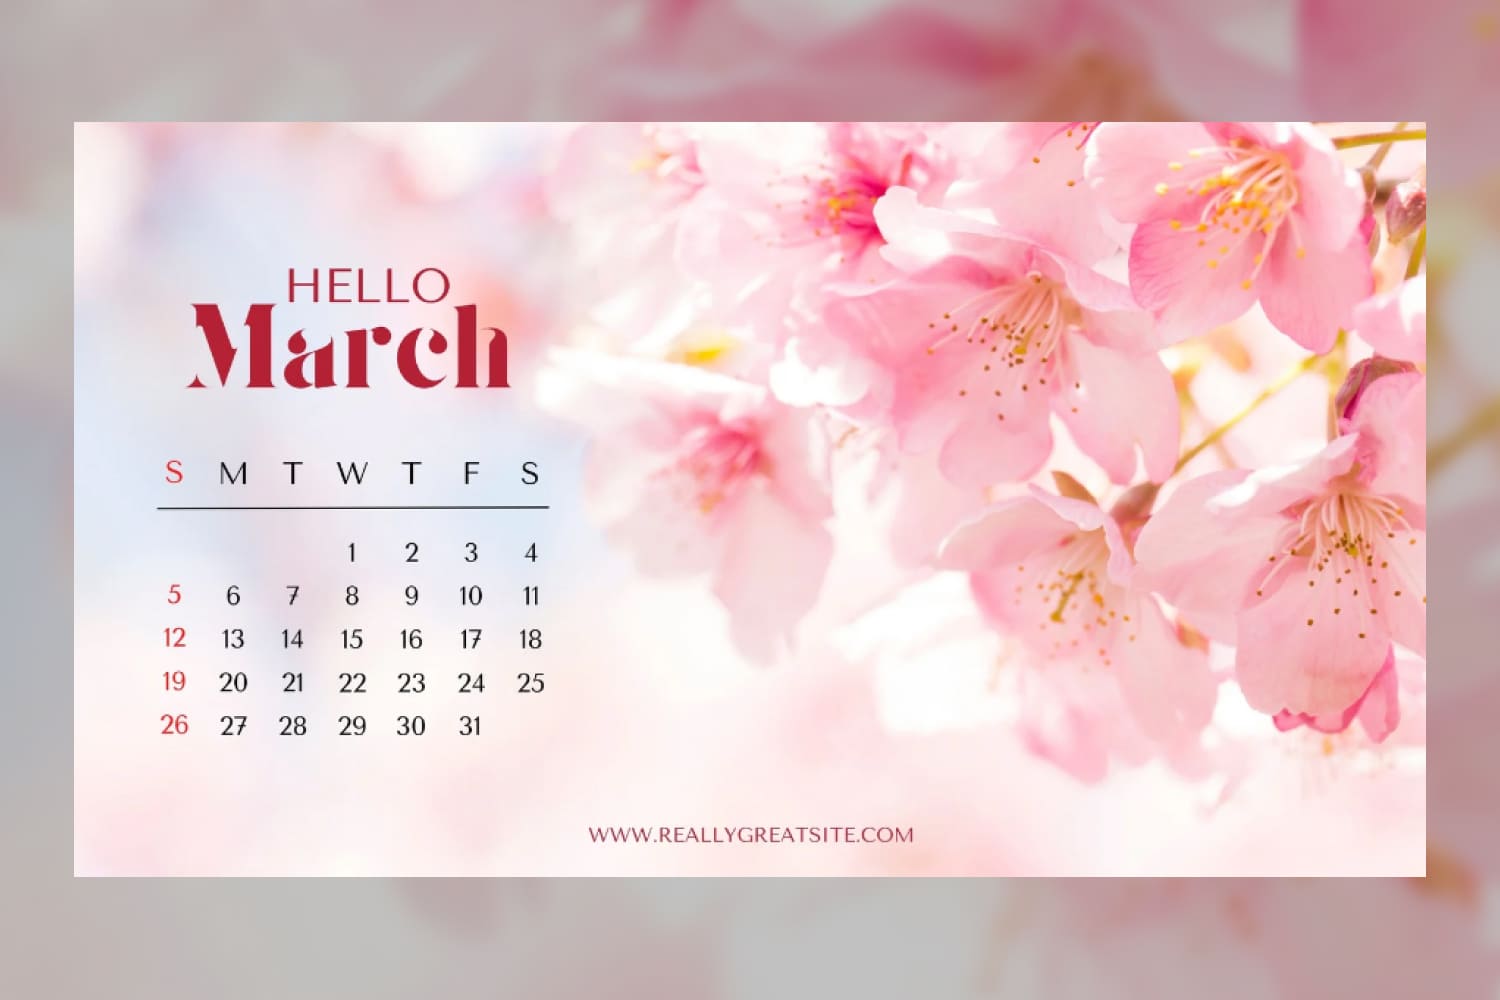 March calendar wallpaper with a high-quality photo of spring flowers in pink and white tones.